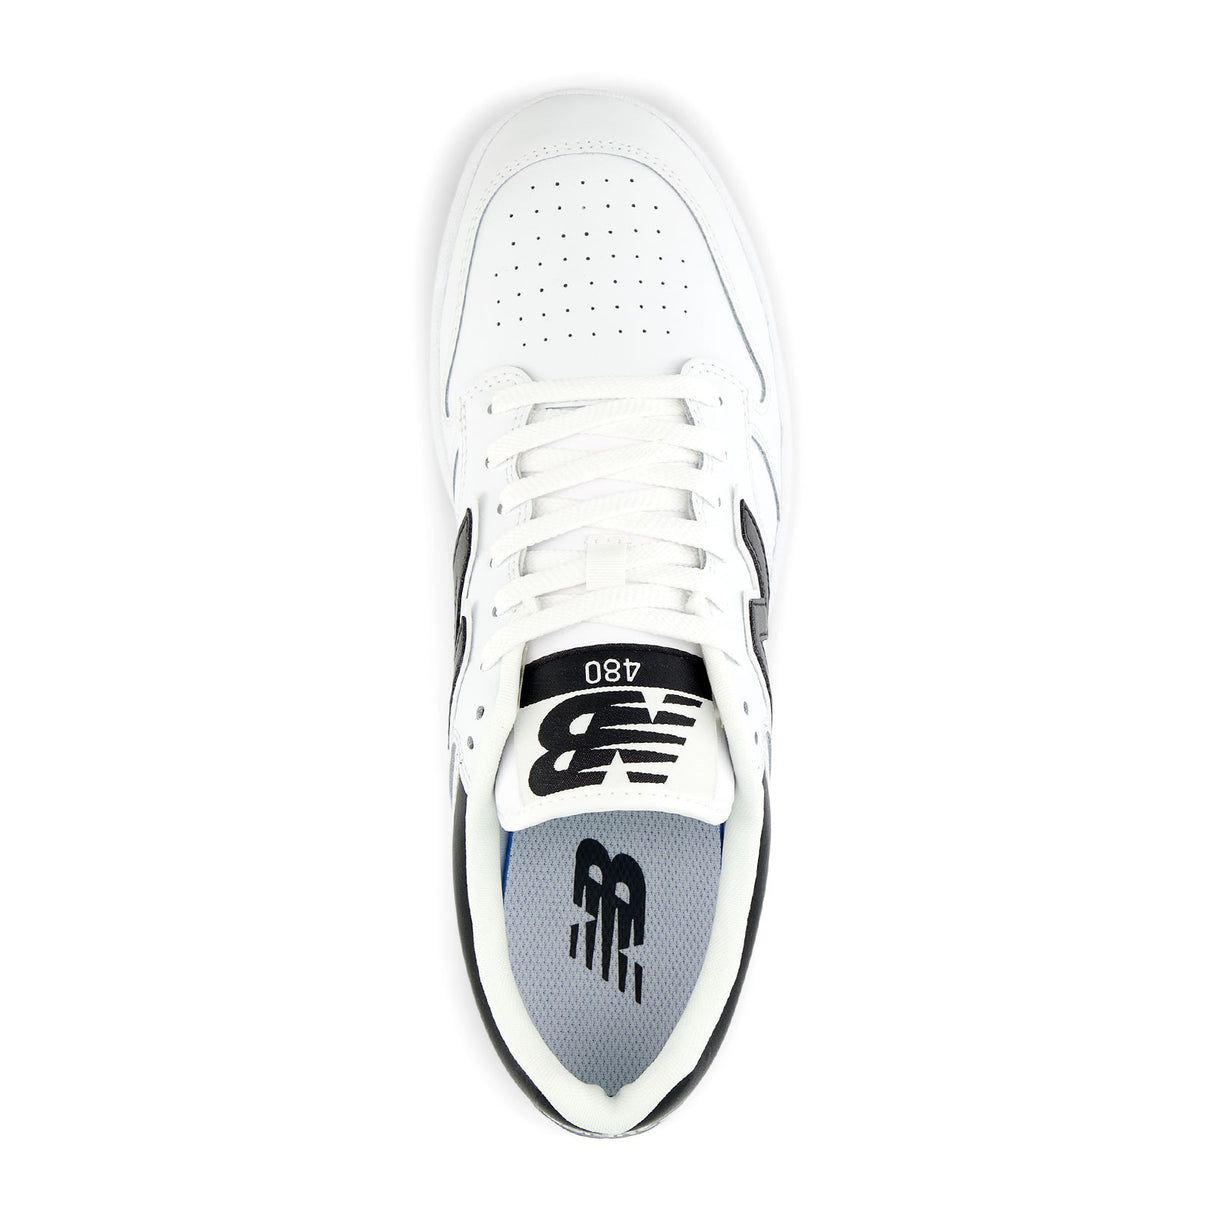 New Balance BB480 Low Sneaker (Men) - White/Black Athletic - Casual - Lace Up - The Heel Shoe Fitters